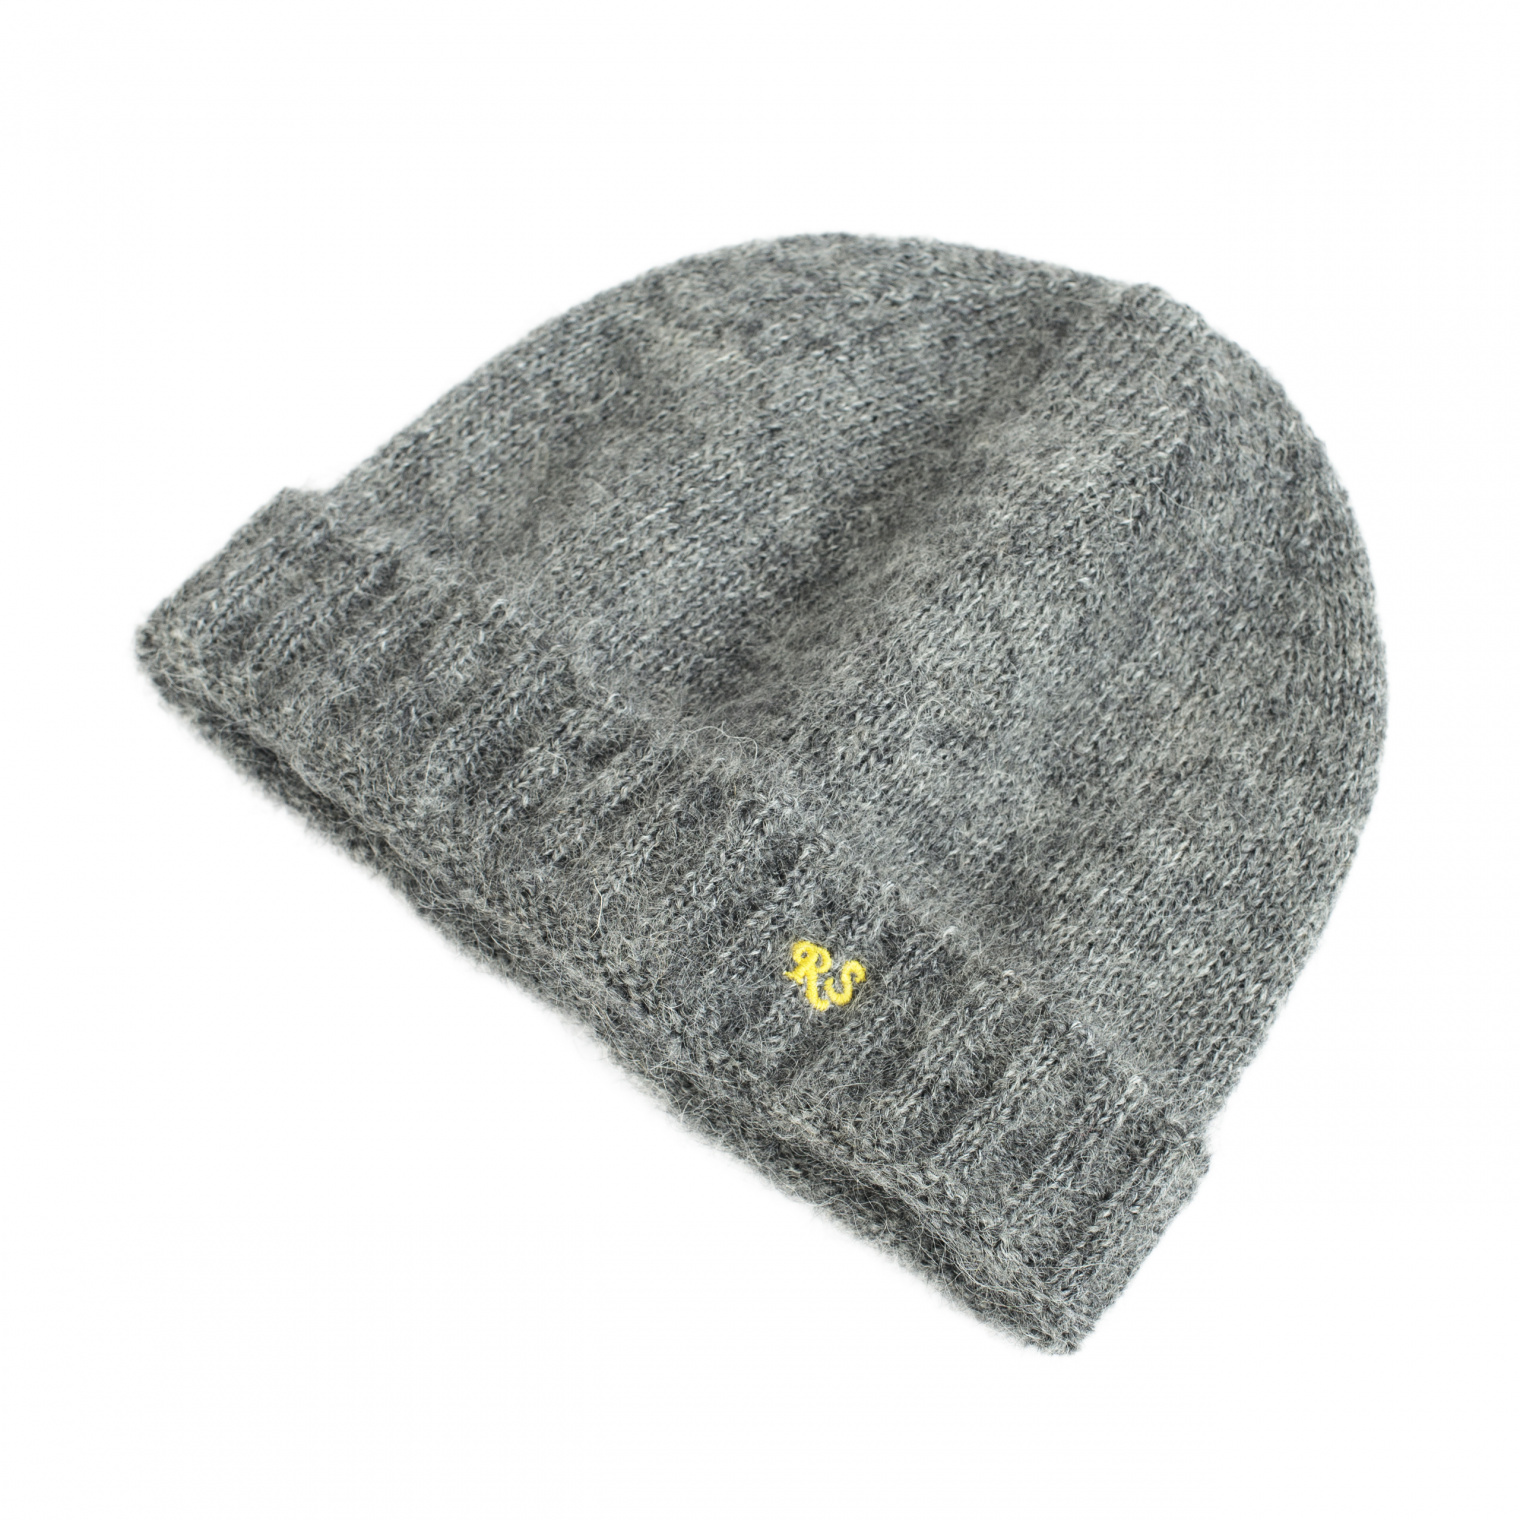 Raf Simons RS Knitted Beanie in grey